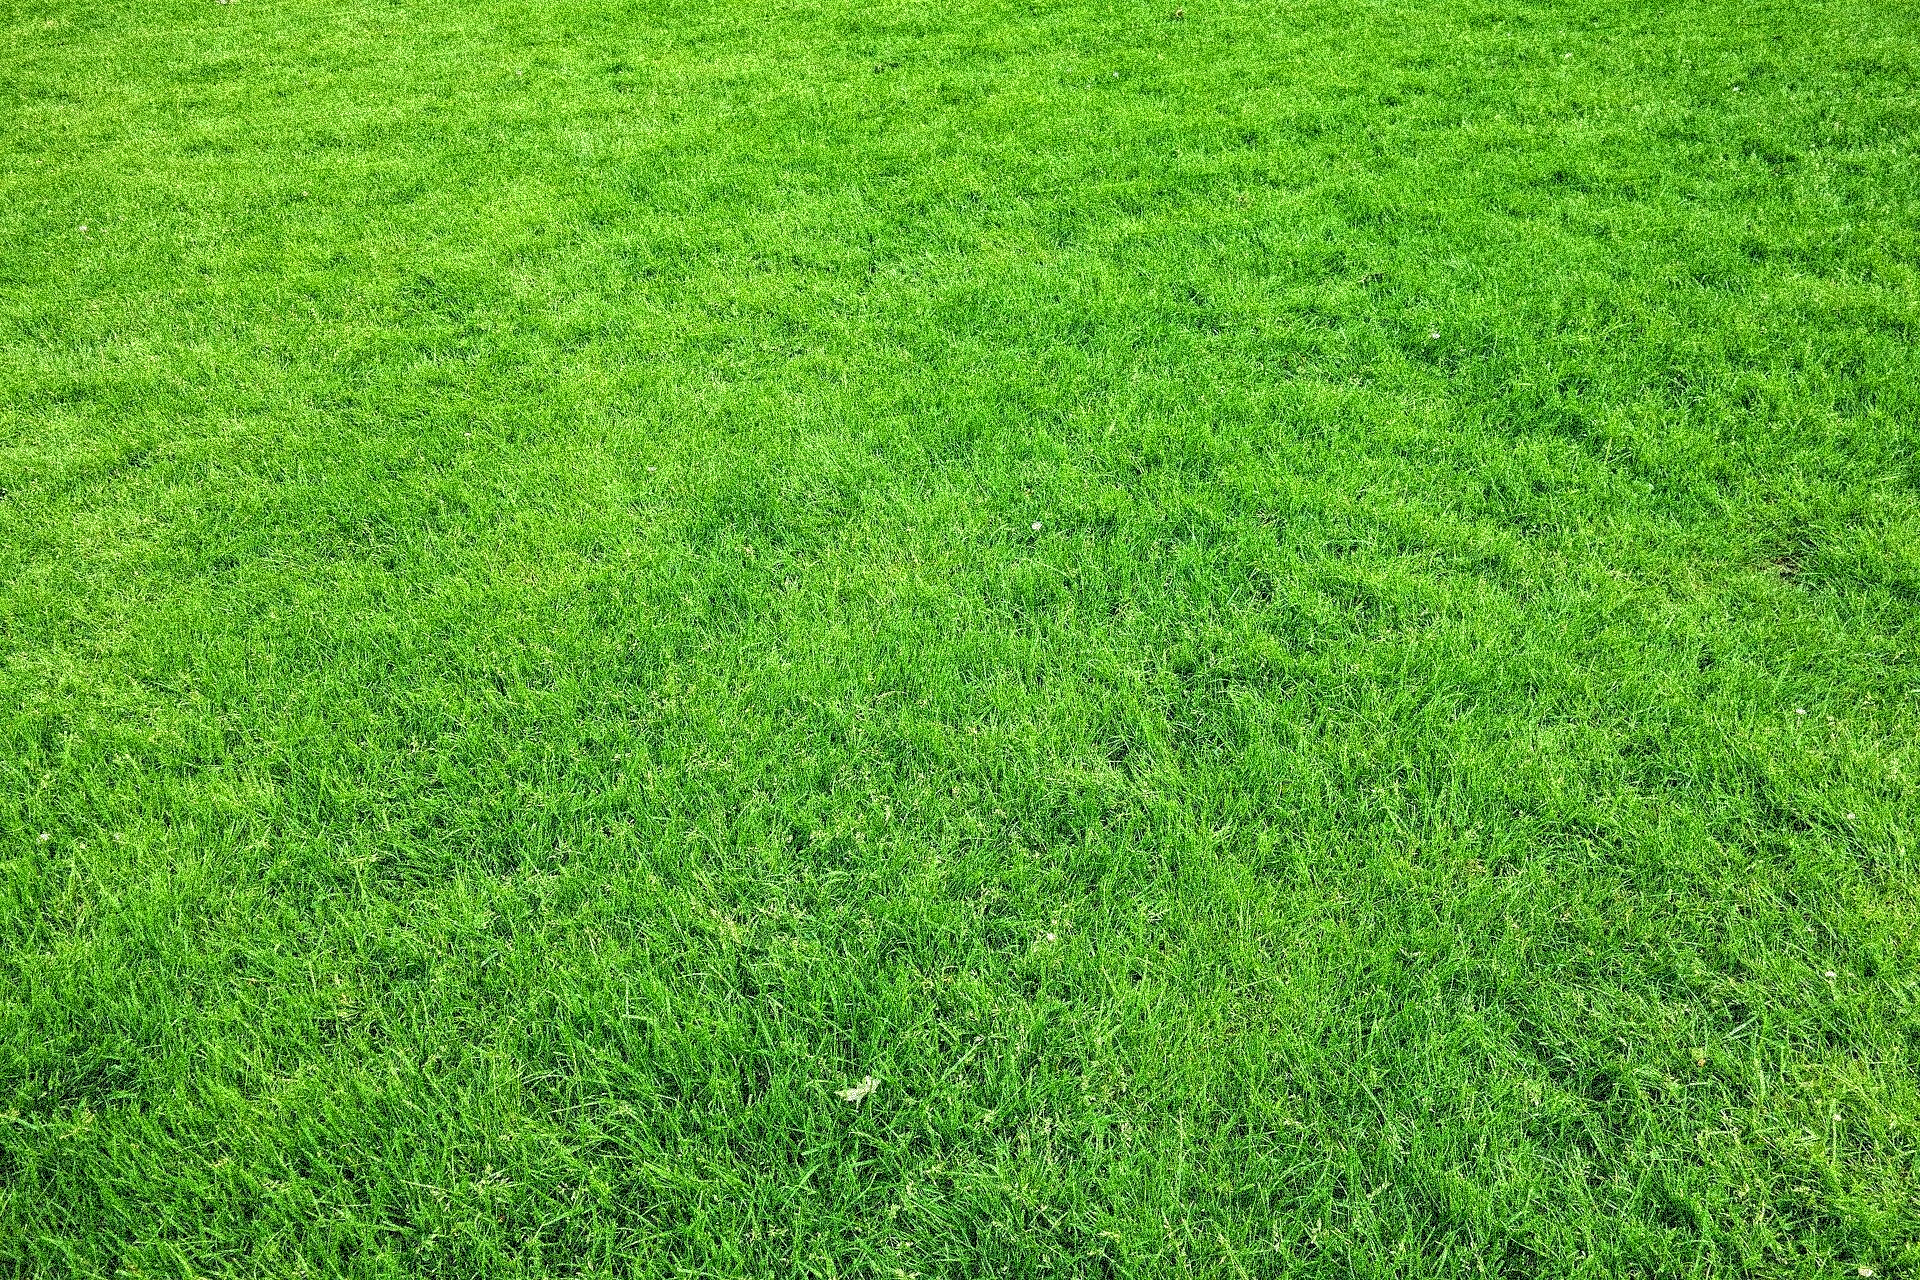 Here’s why you should keep to a regular routine and mow your lawn when it needs it.